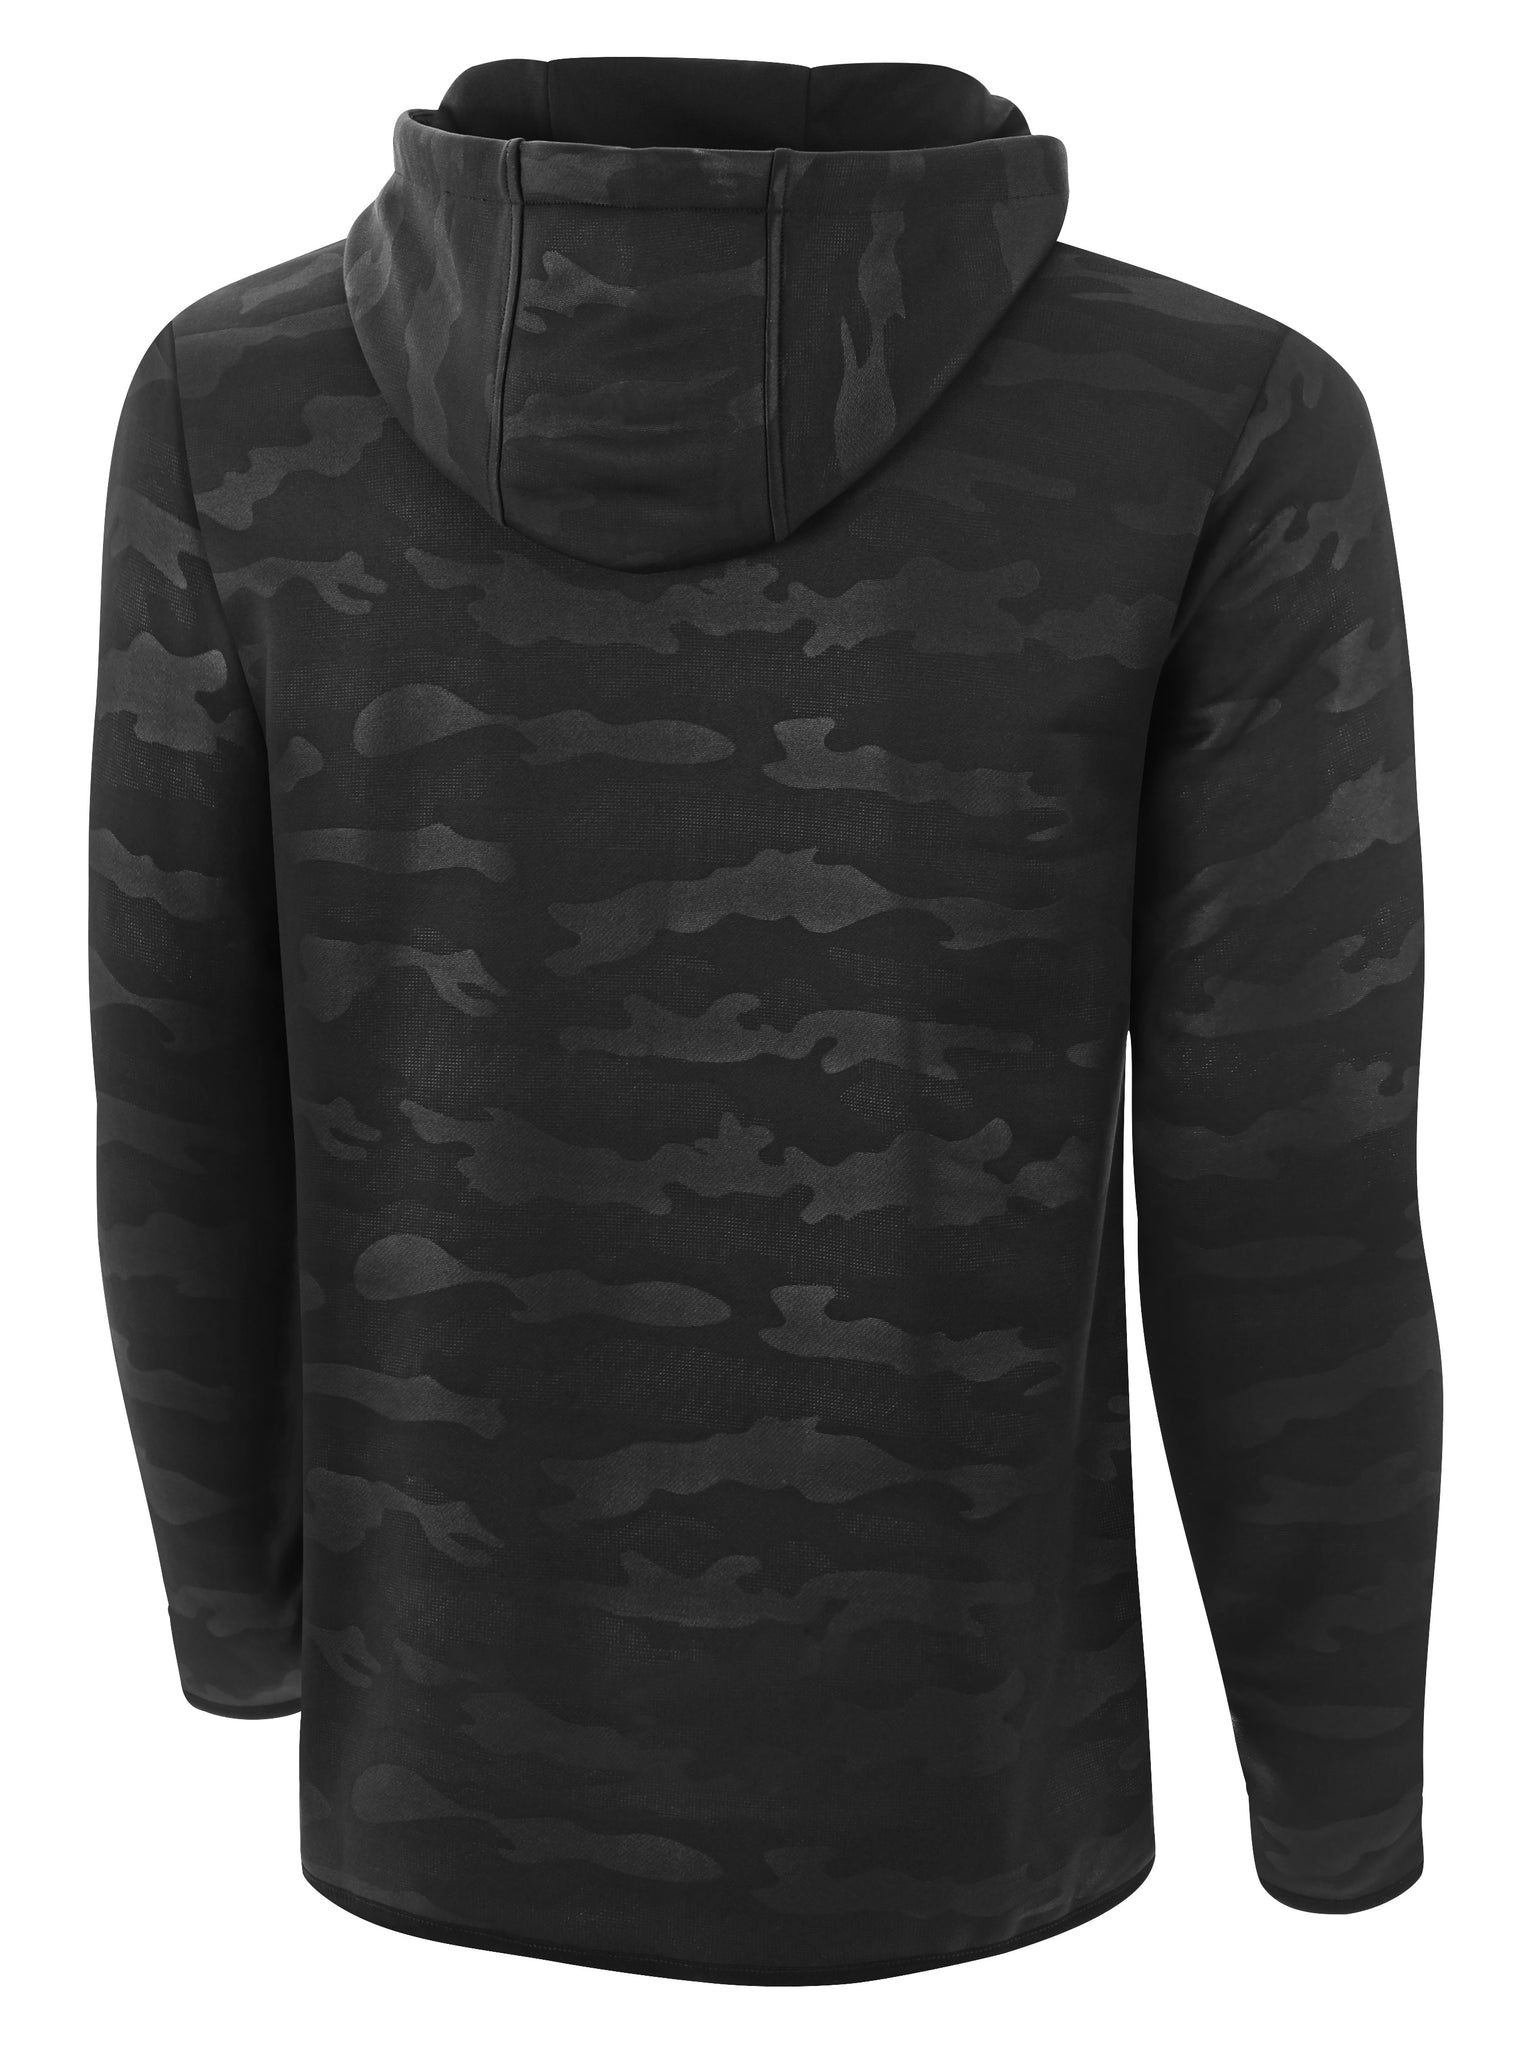 Men's Lifestyle Camo Embossed Hooded Training Top AGA-3908HP